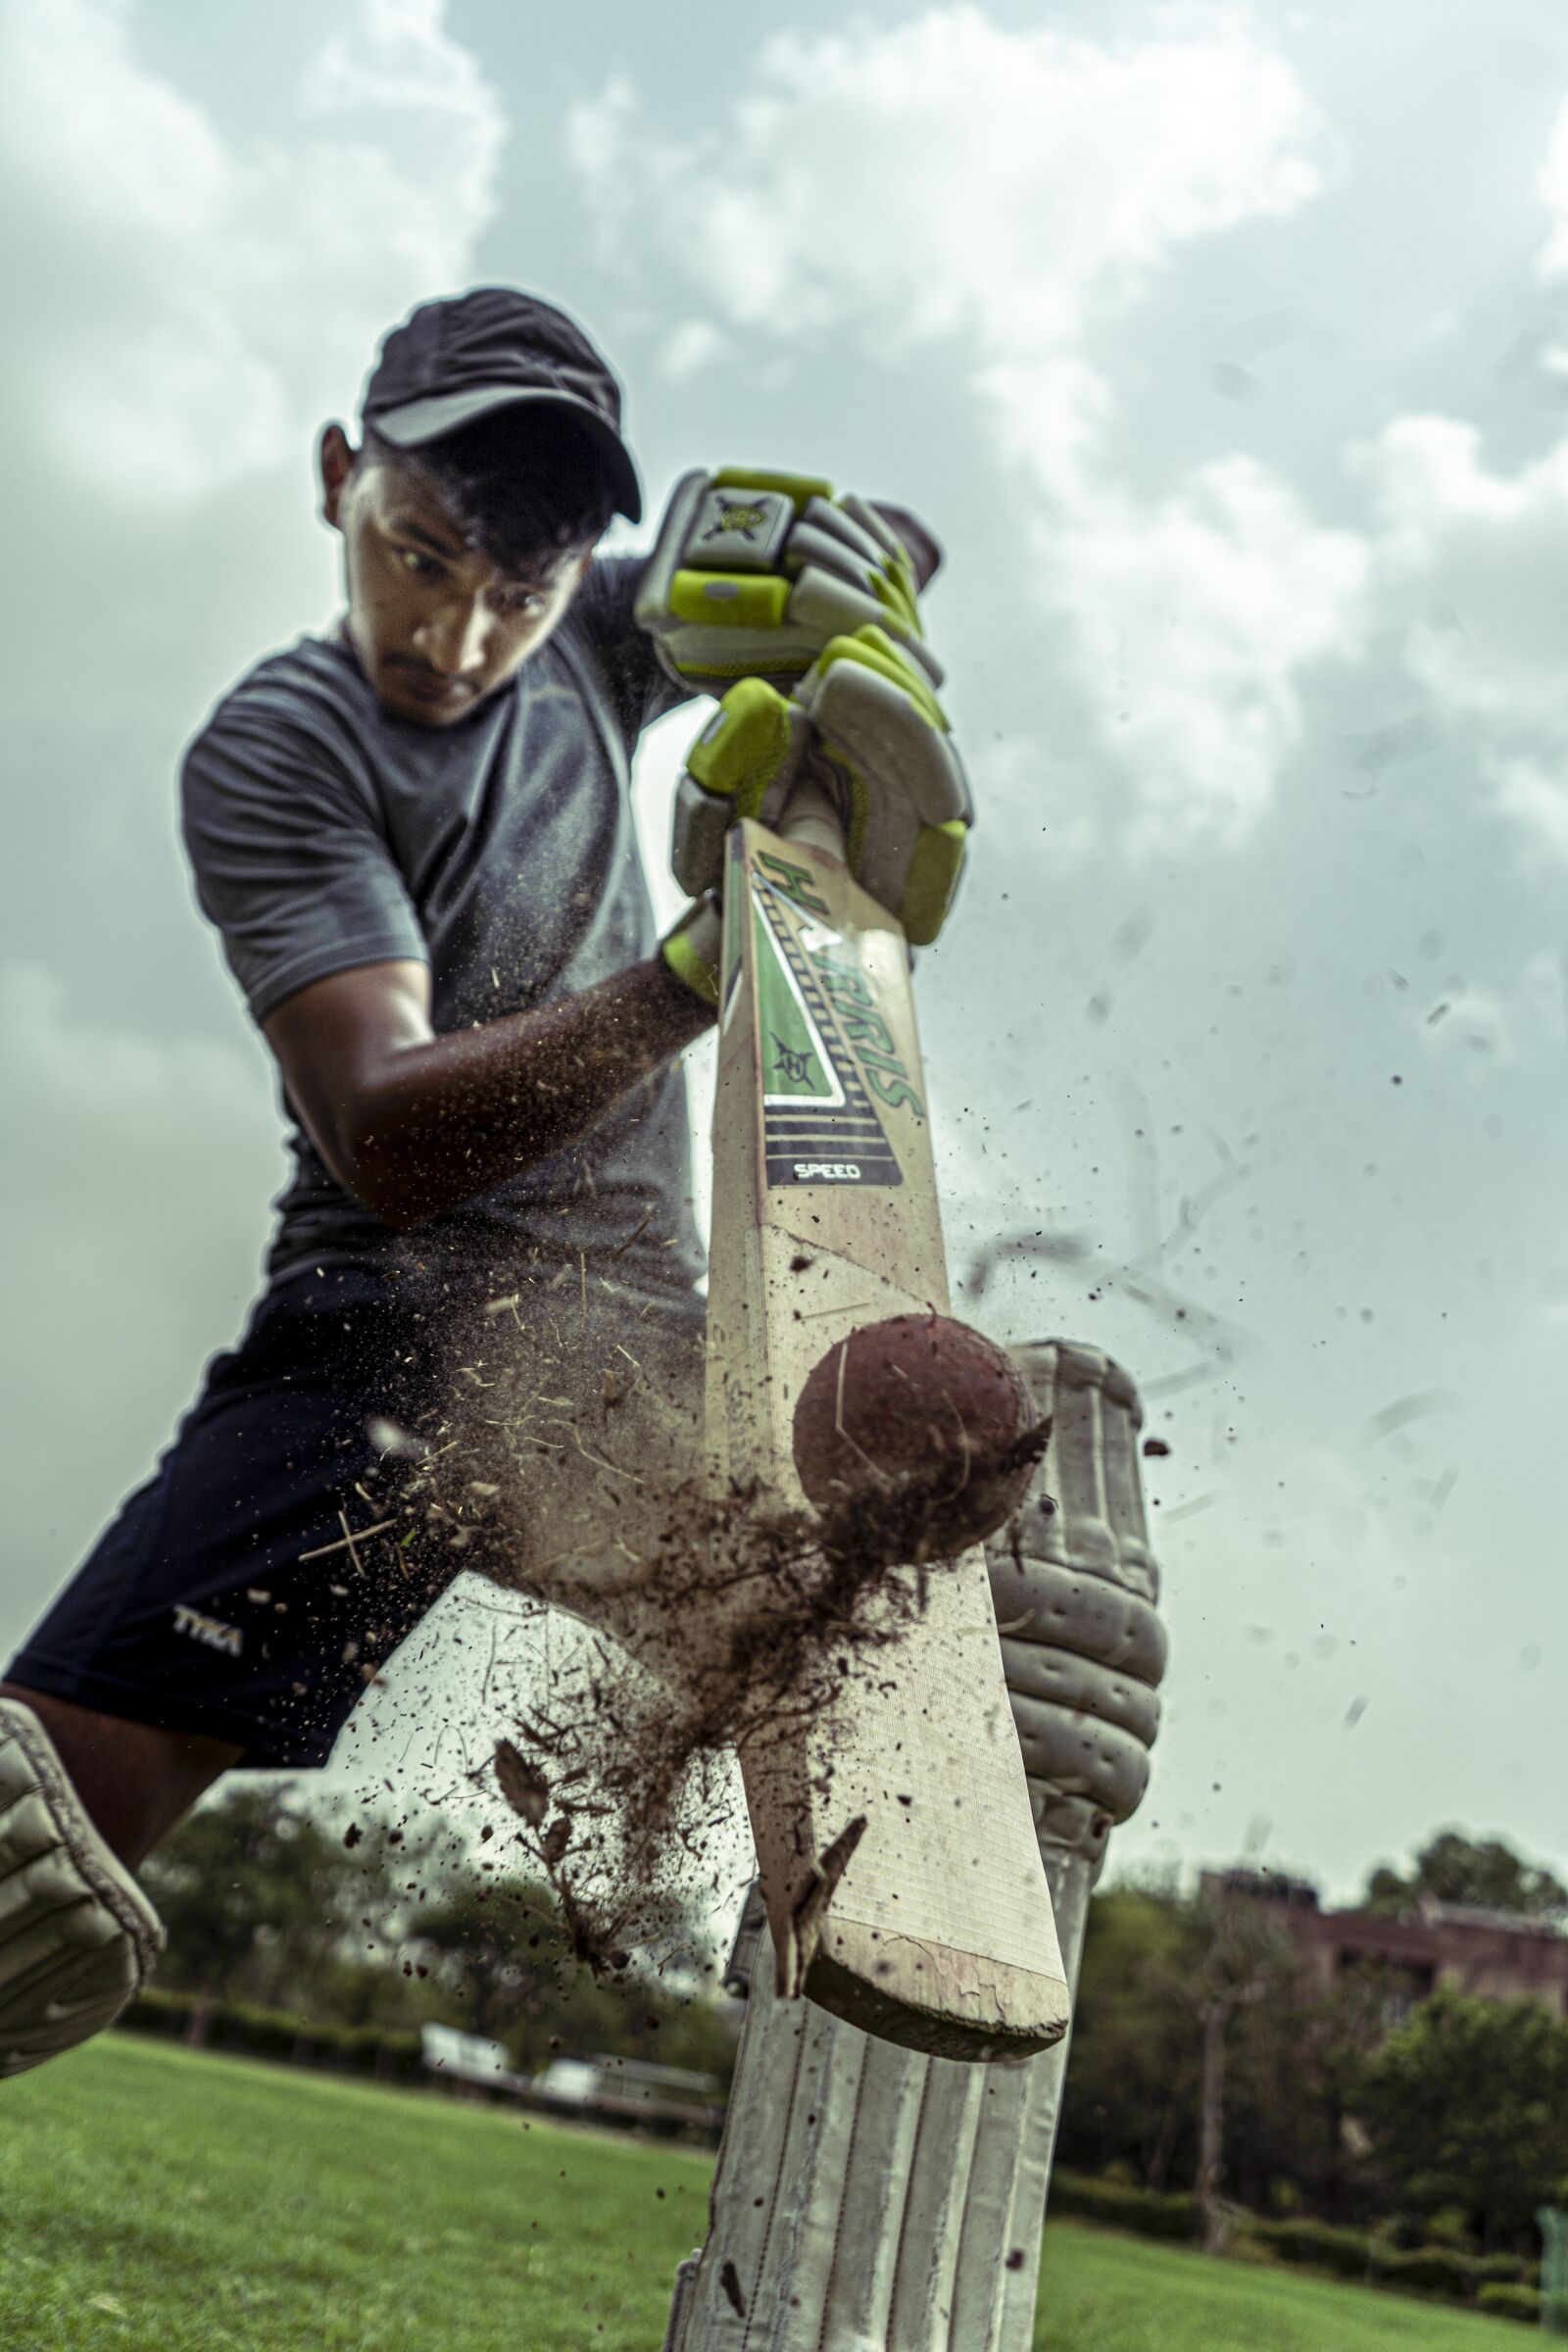 Sony a7 III sample photo. Cricket, sports, player photography